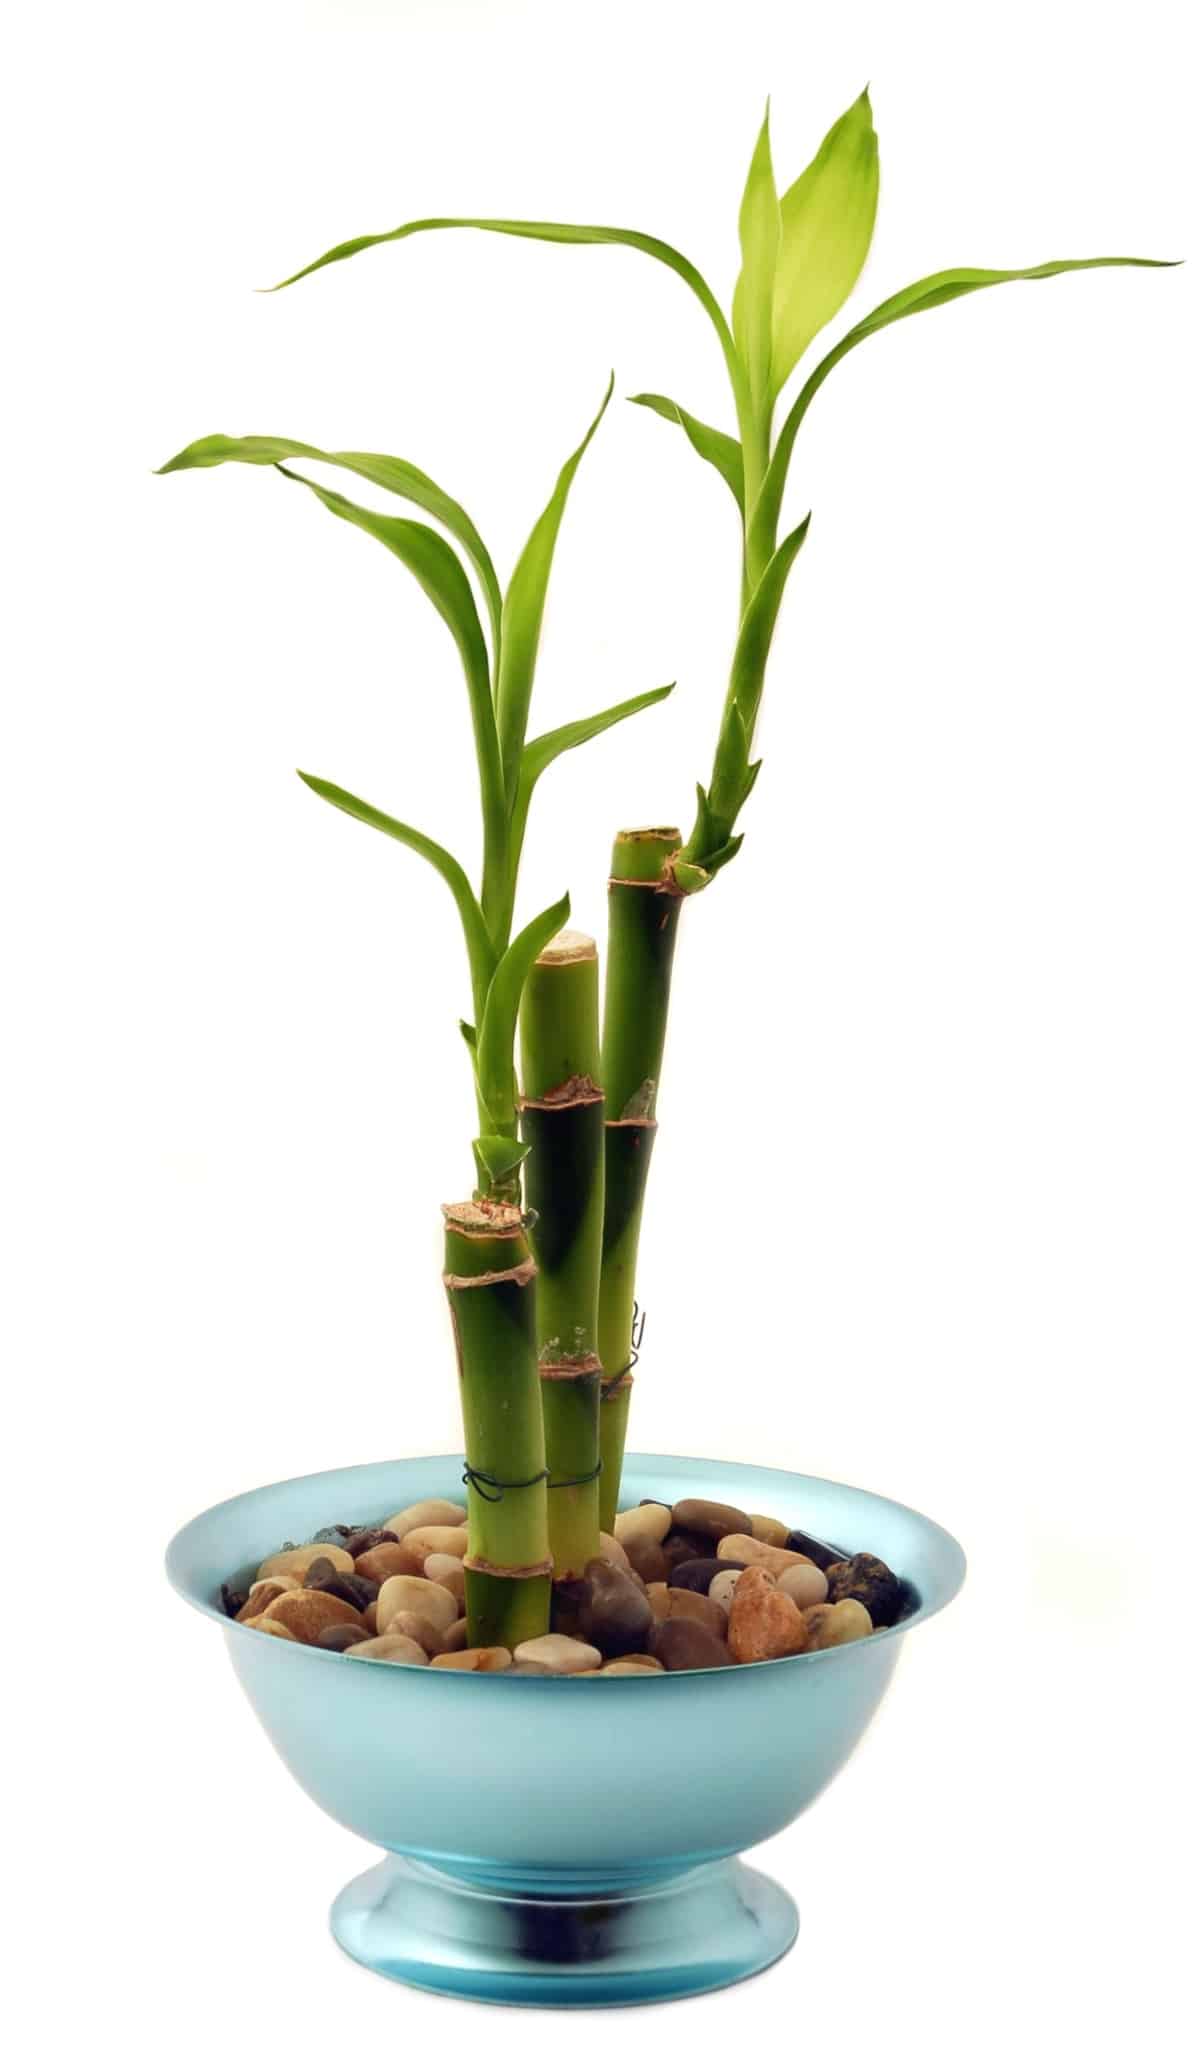 Lucky bamboo advice on caring for this special Dracaena